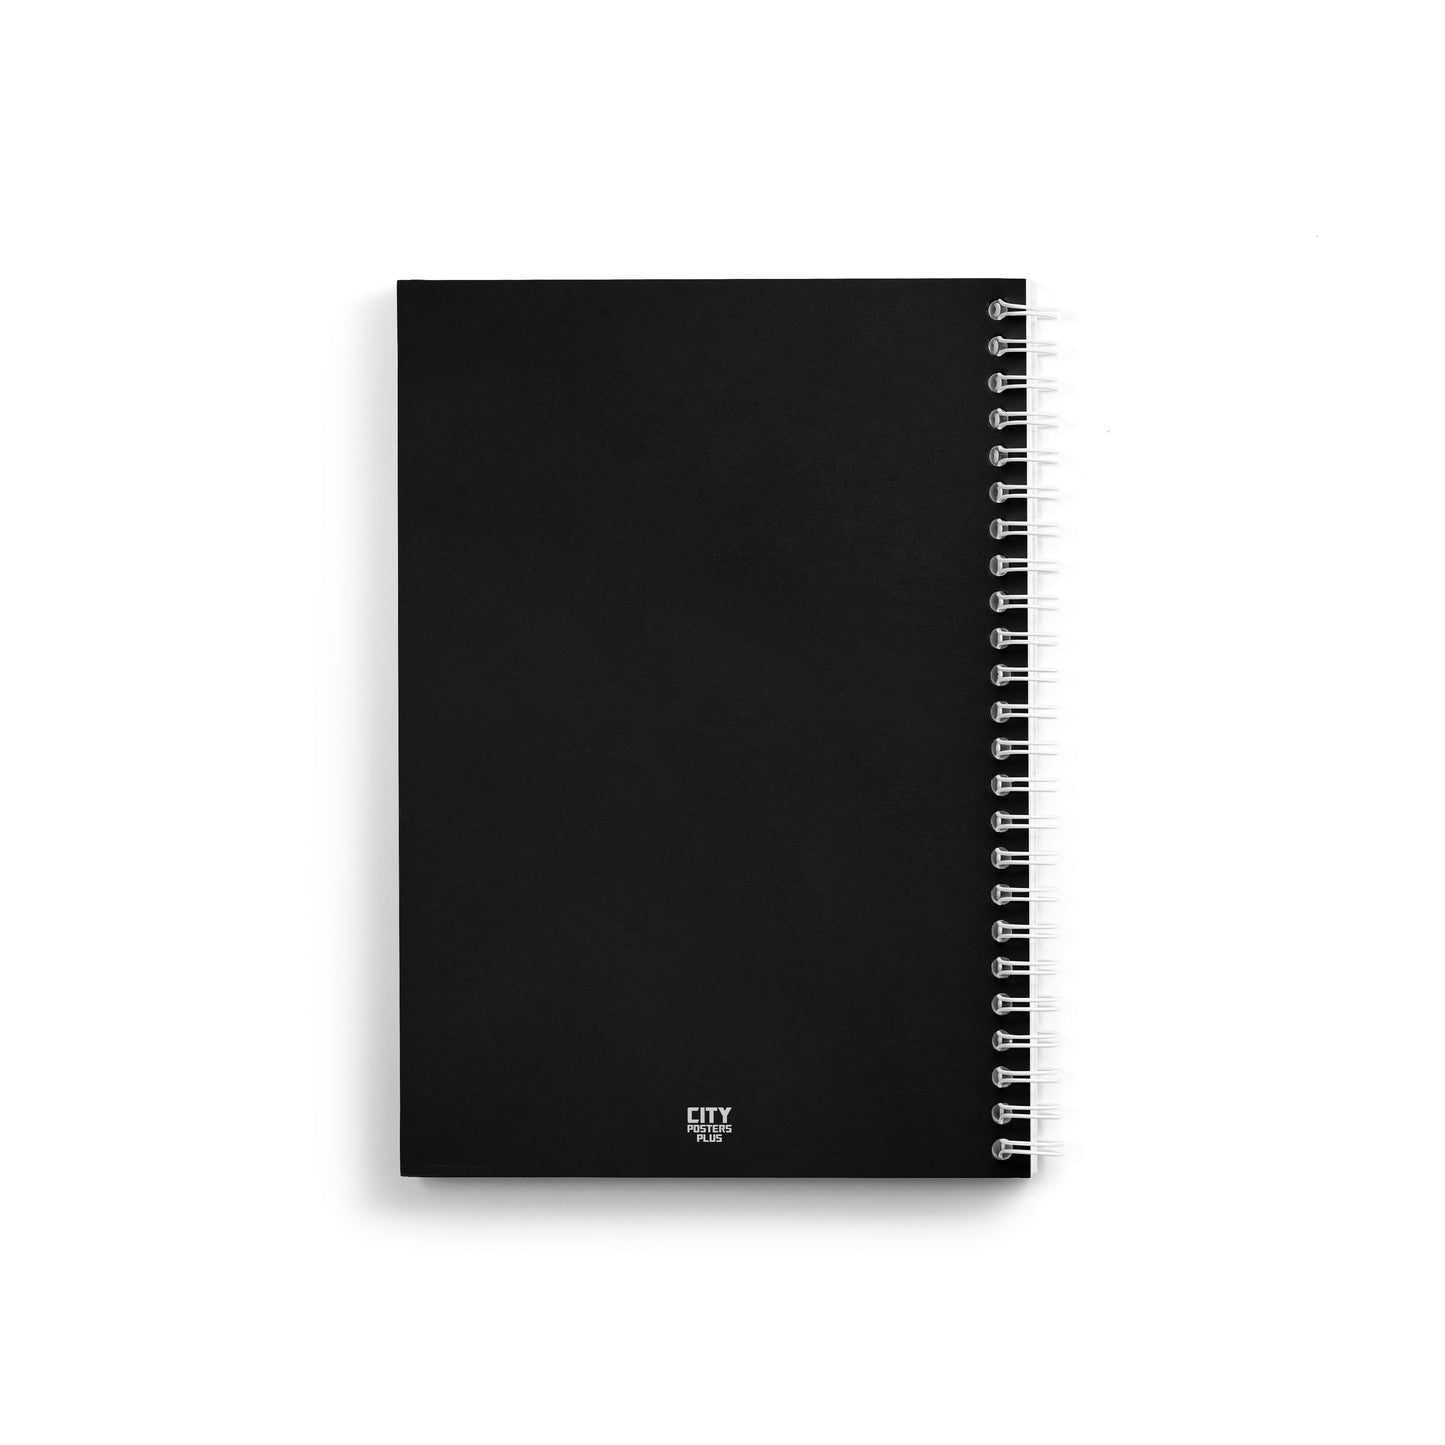 Zunheboto Notebook (A5 Size, 100 Pages, Ruled)